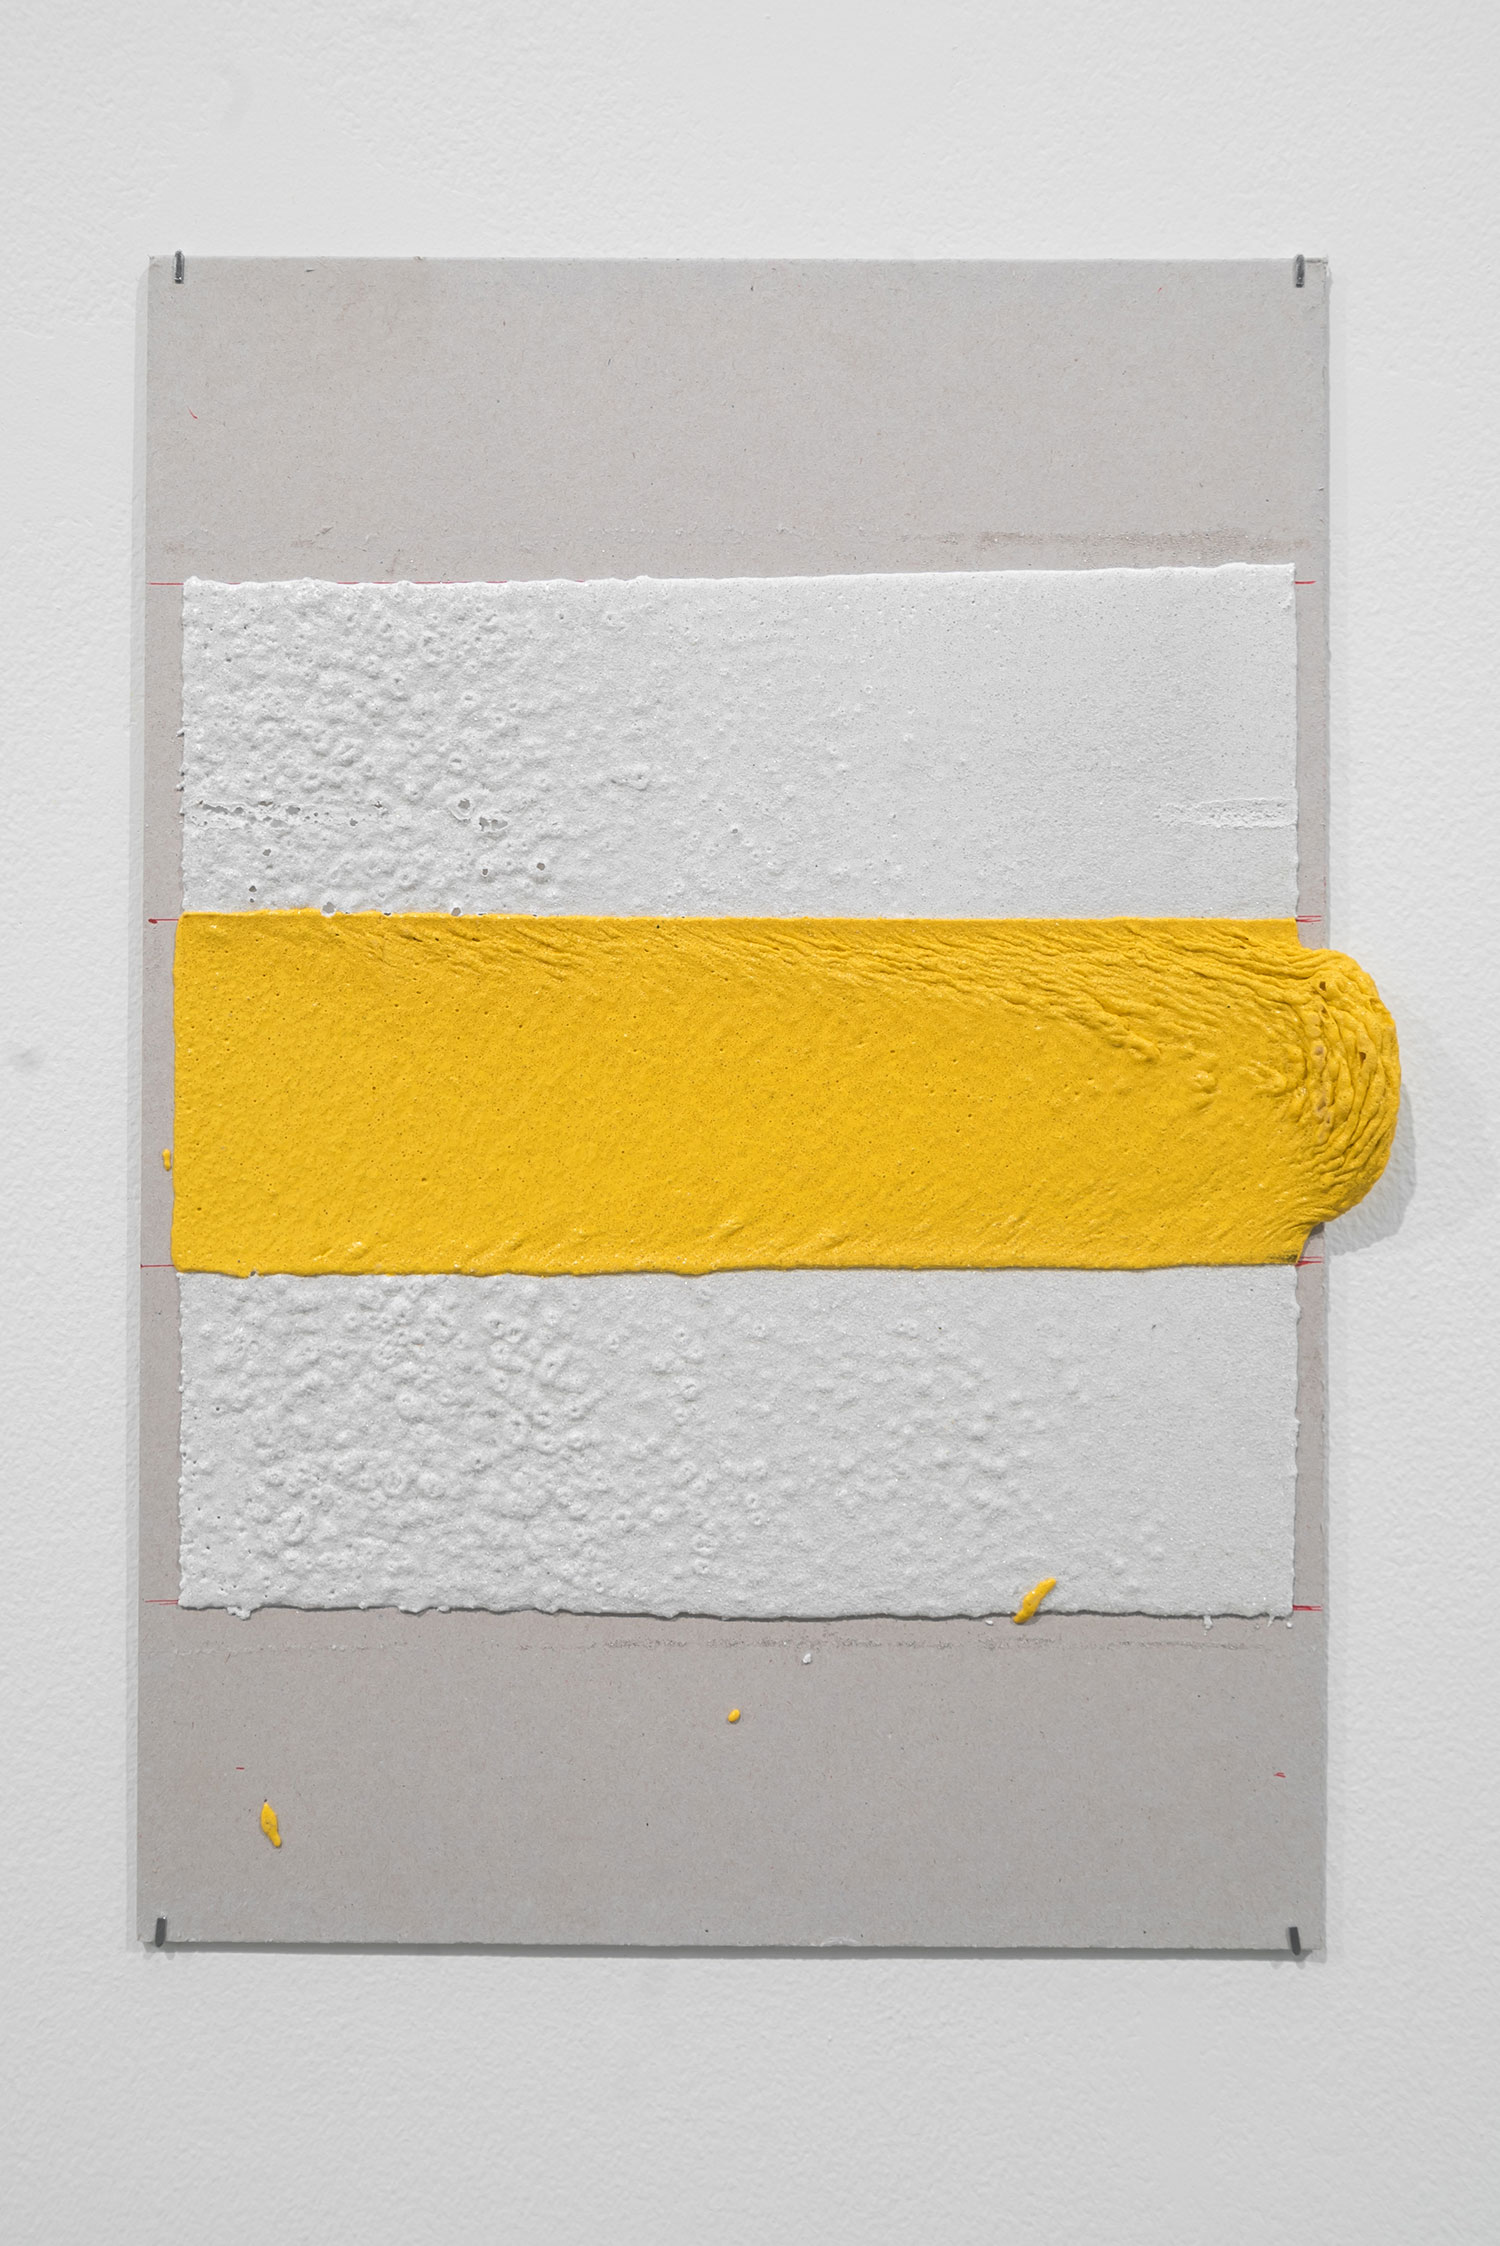   300mm (W), 100mm (W), 1.5mm (T), White, Yellow, Random mark, hand marking, remarking, Al Barsha South, Unnamed street,  2017  Thermoplastic paint and reflective glass particles on grey board  35 x 50 cm 